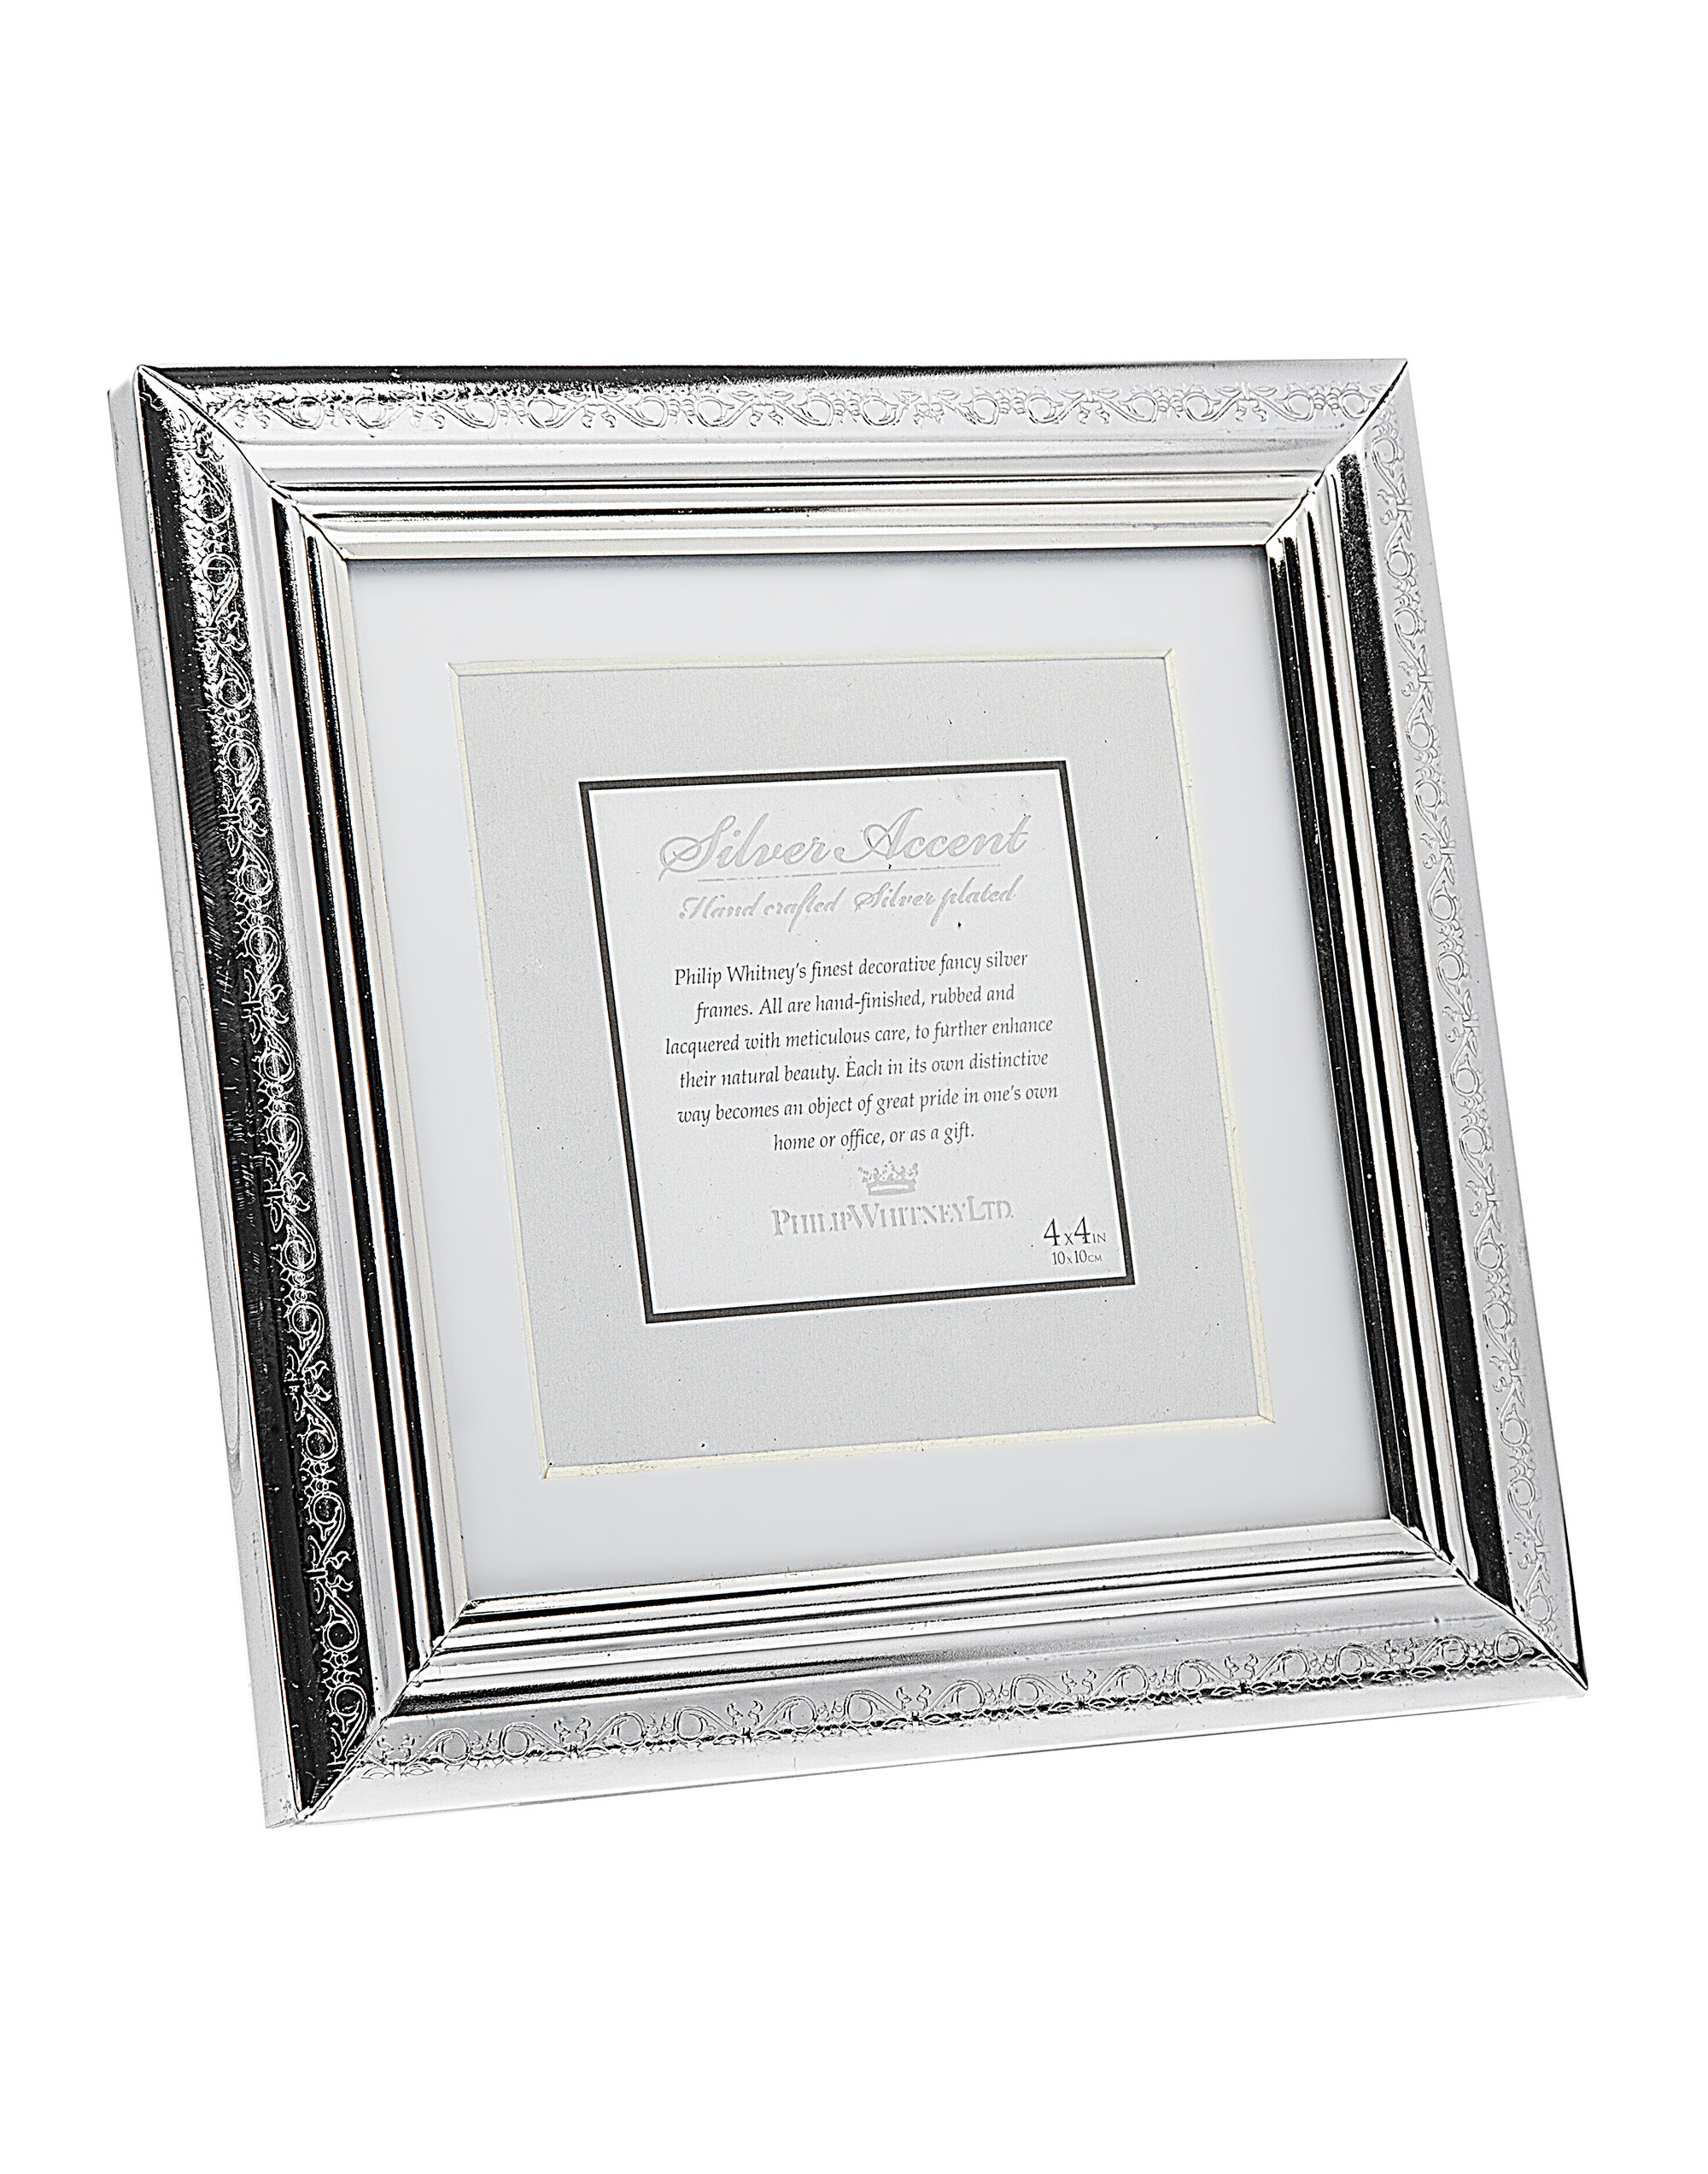 FIORI /6x9 USA 3,5x2,5 in Solid 925 Sterling Silver Photo Picture Frame